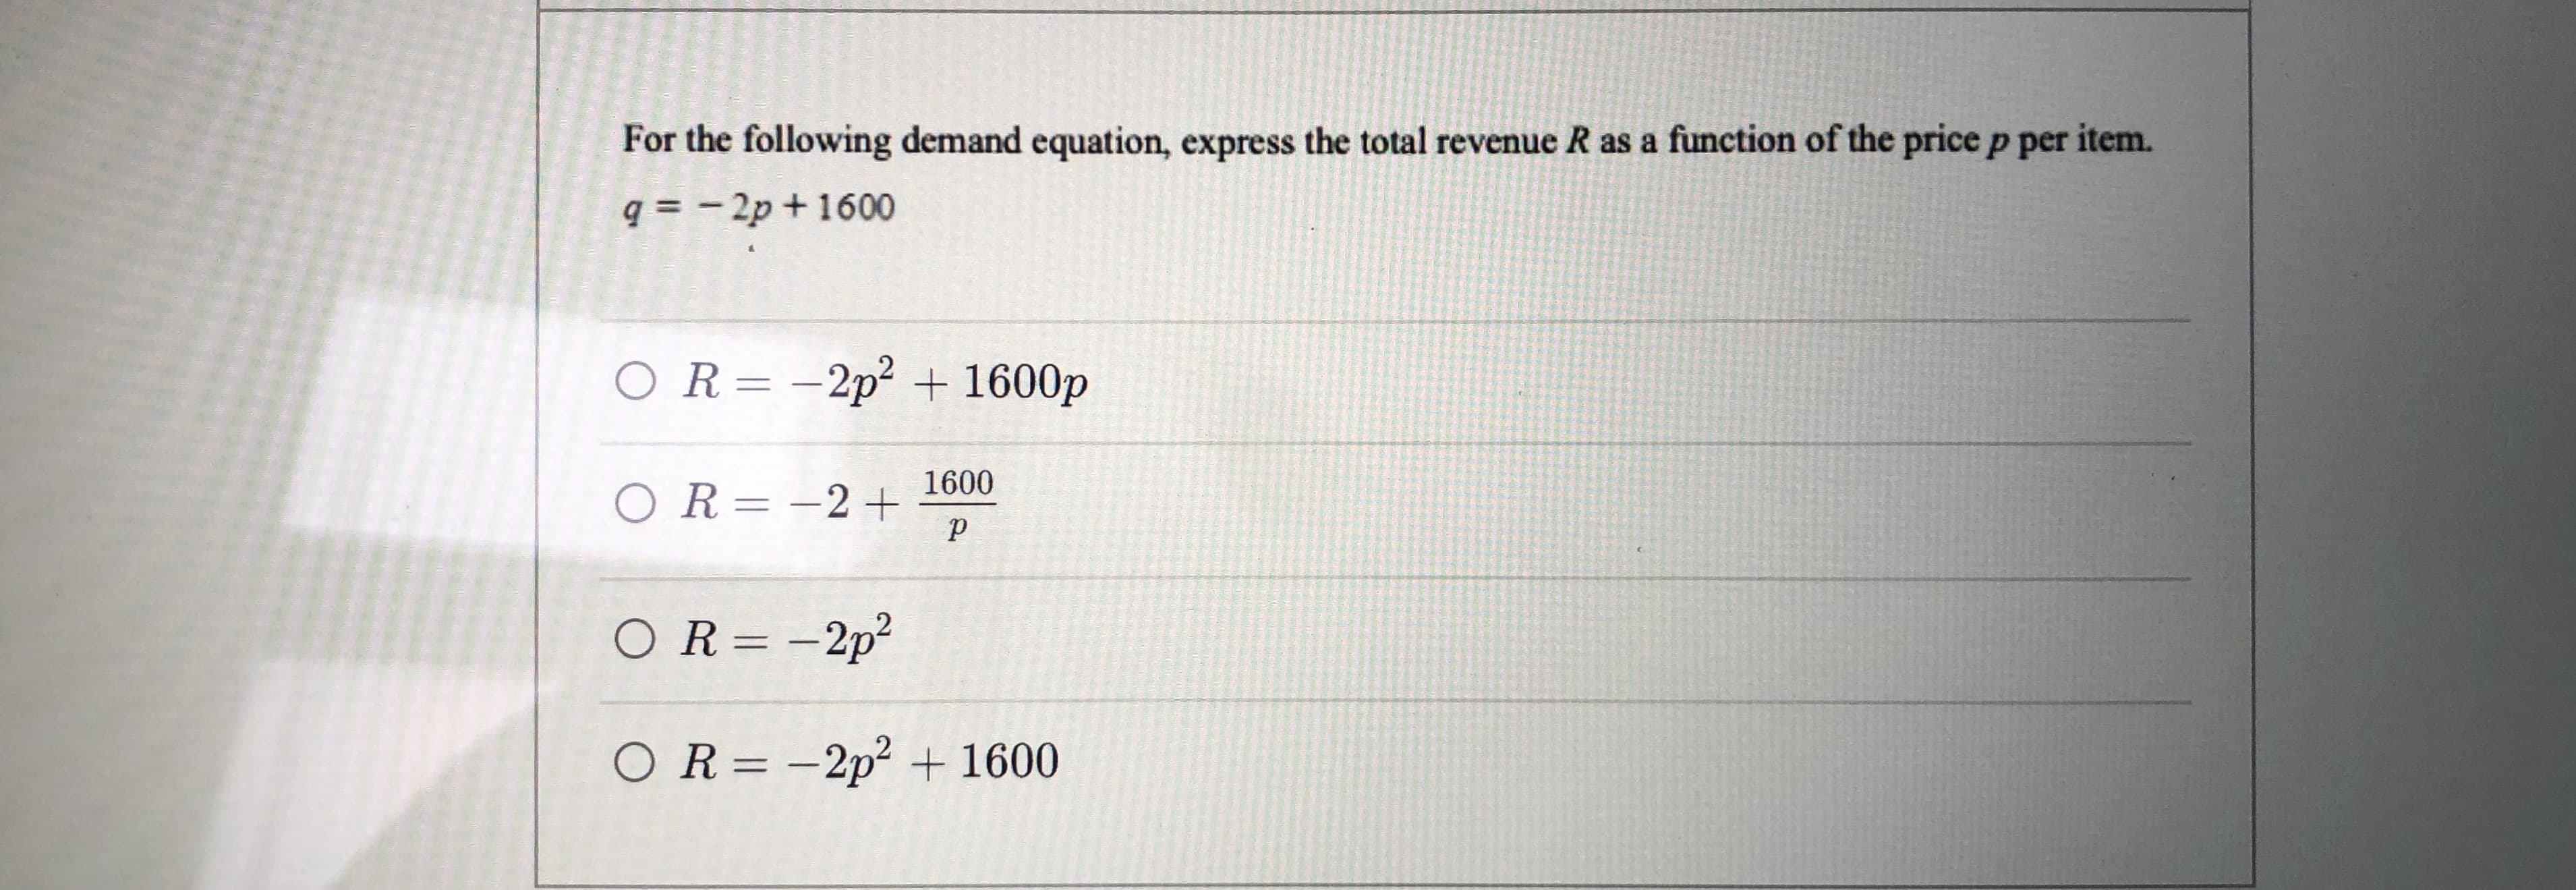 For the following demand equation, express the total revenue R as a function of the price p per item.
q = - 2p + 1600
OR=-2p² + 1600p
1600
OR= -2+
OR= -2p²
OR= -2p² + 1600
